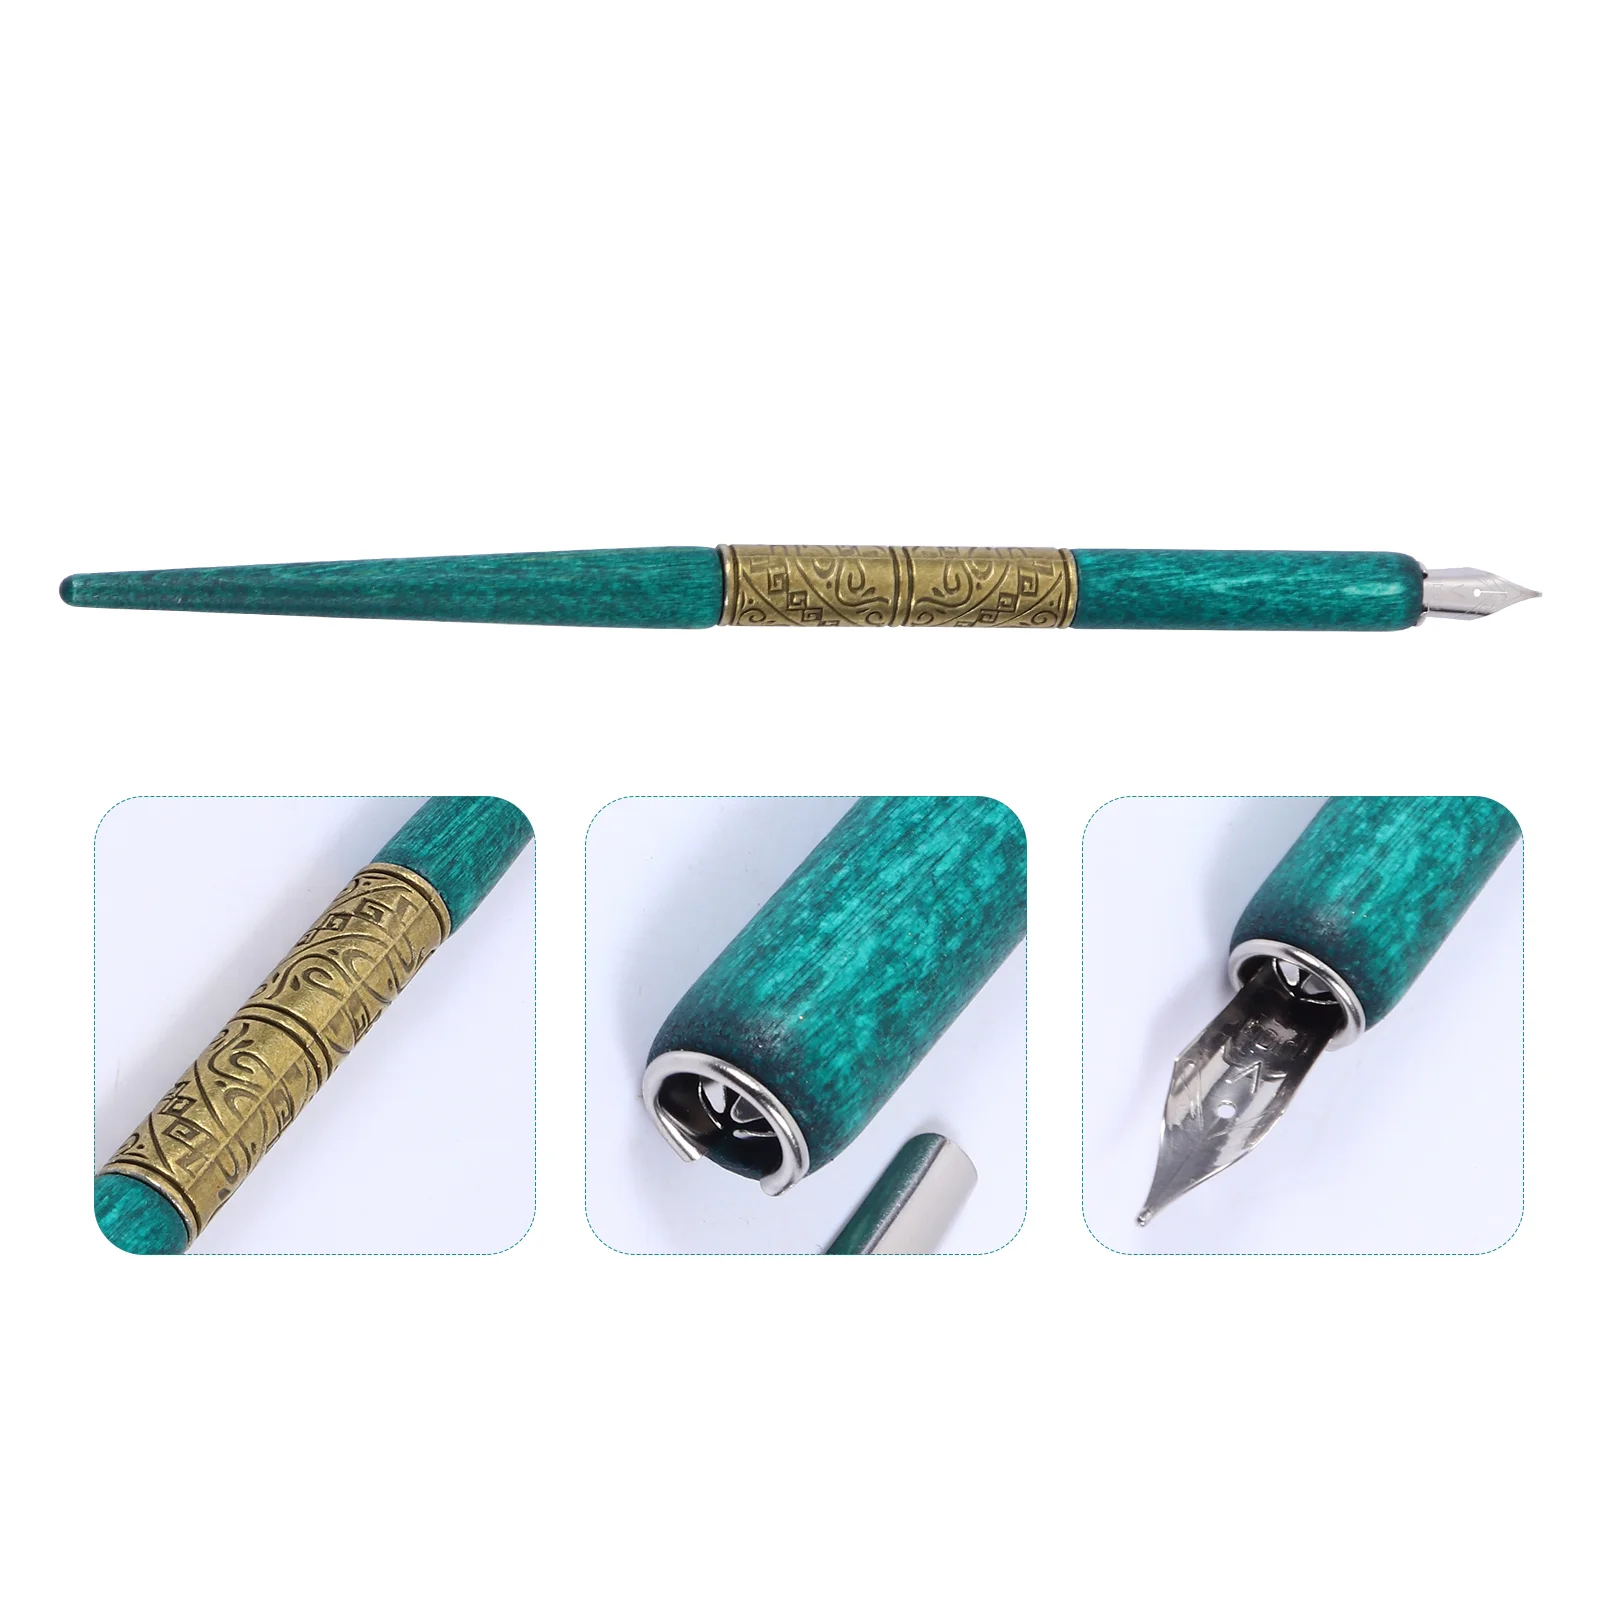 

Wooden Dip Pen Calligraphy Kit Supplies Pens Old Fashioned English Glass Decor Starter Writing